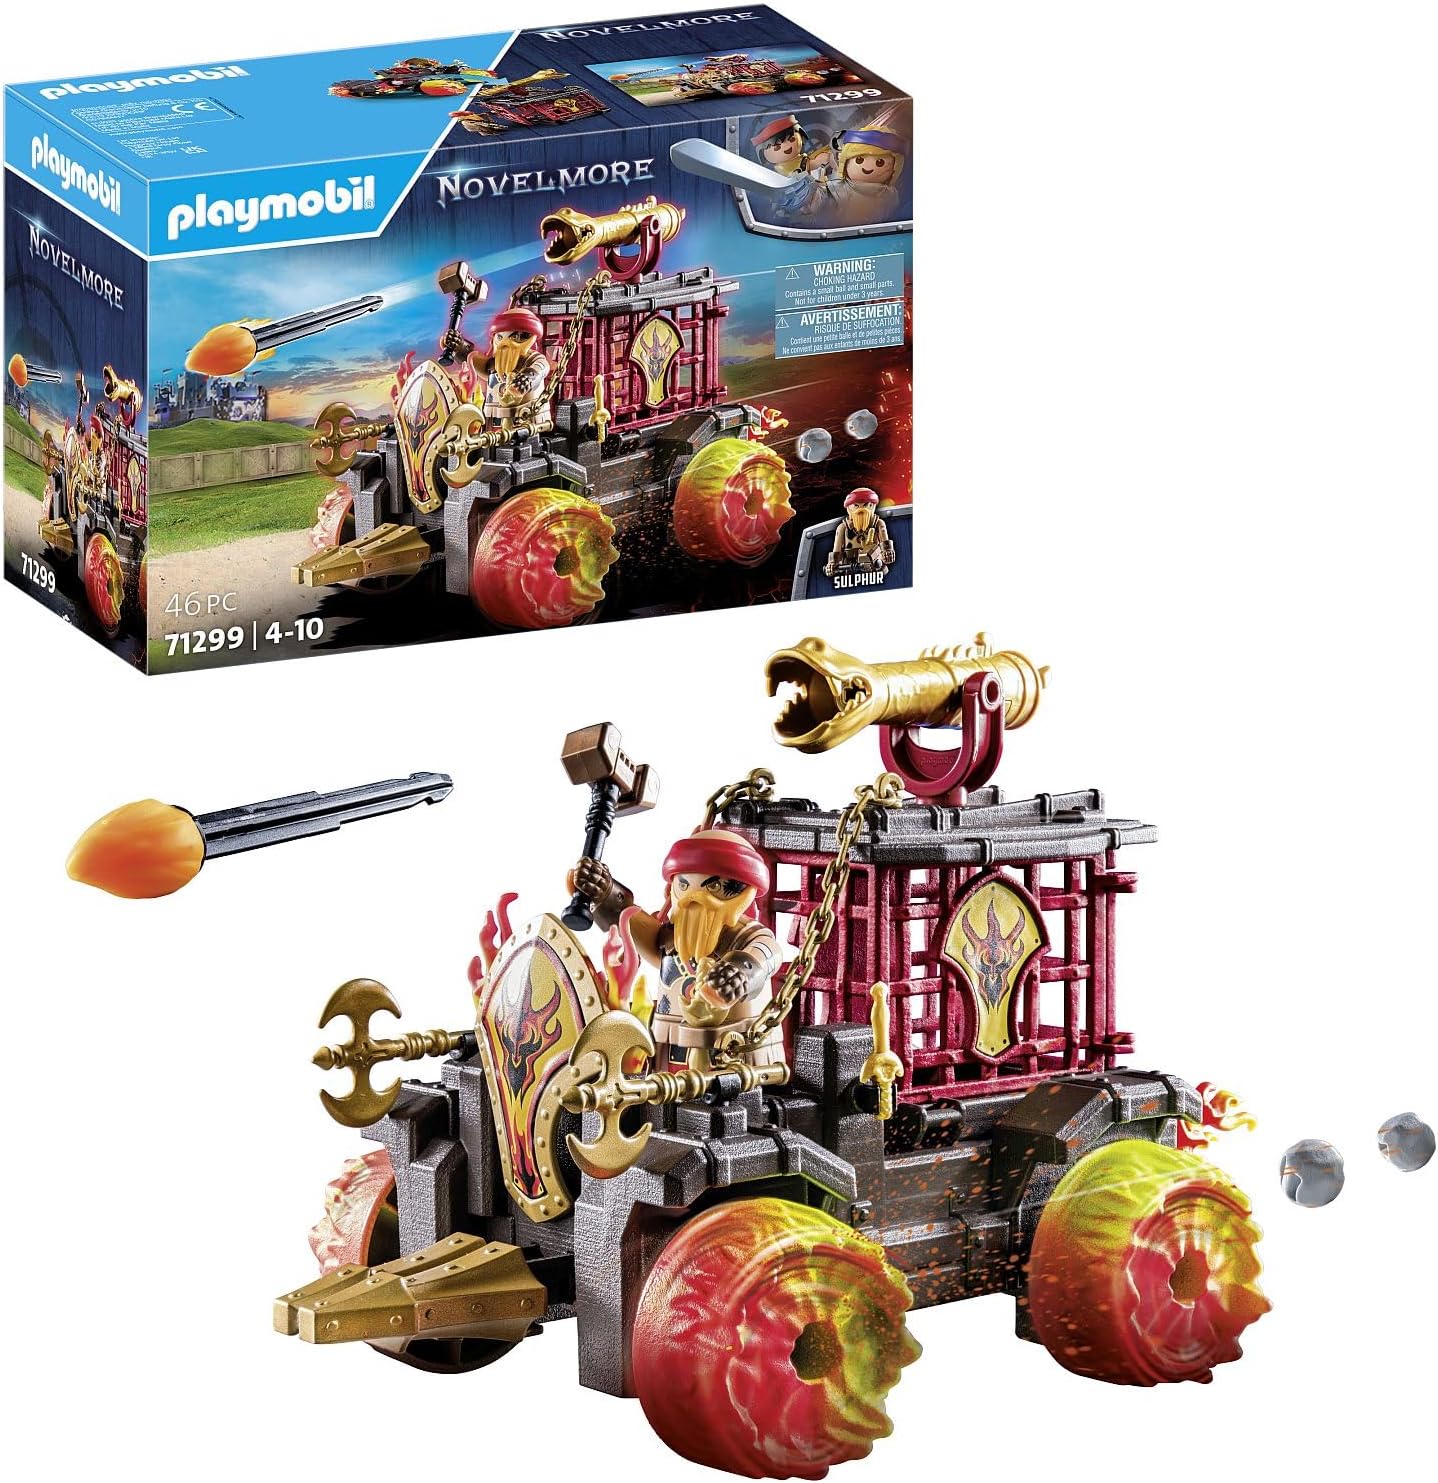 PLAYMOBIL Novelmore 71299 Burnham Raiders Fire Fighting Car, Fiery Fight Between Burnham Raider and Novelmore, with Ram Buck, Flame Wheels and Slingshot Seat, Toy for Children from 4 Years